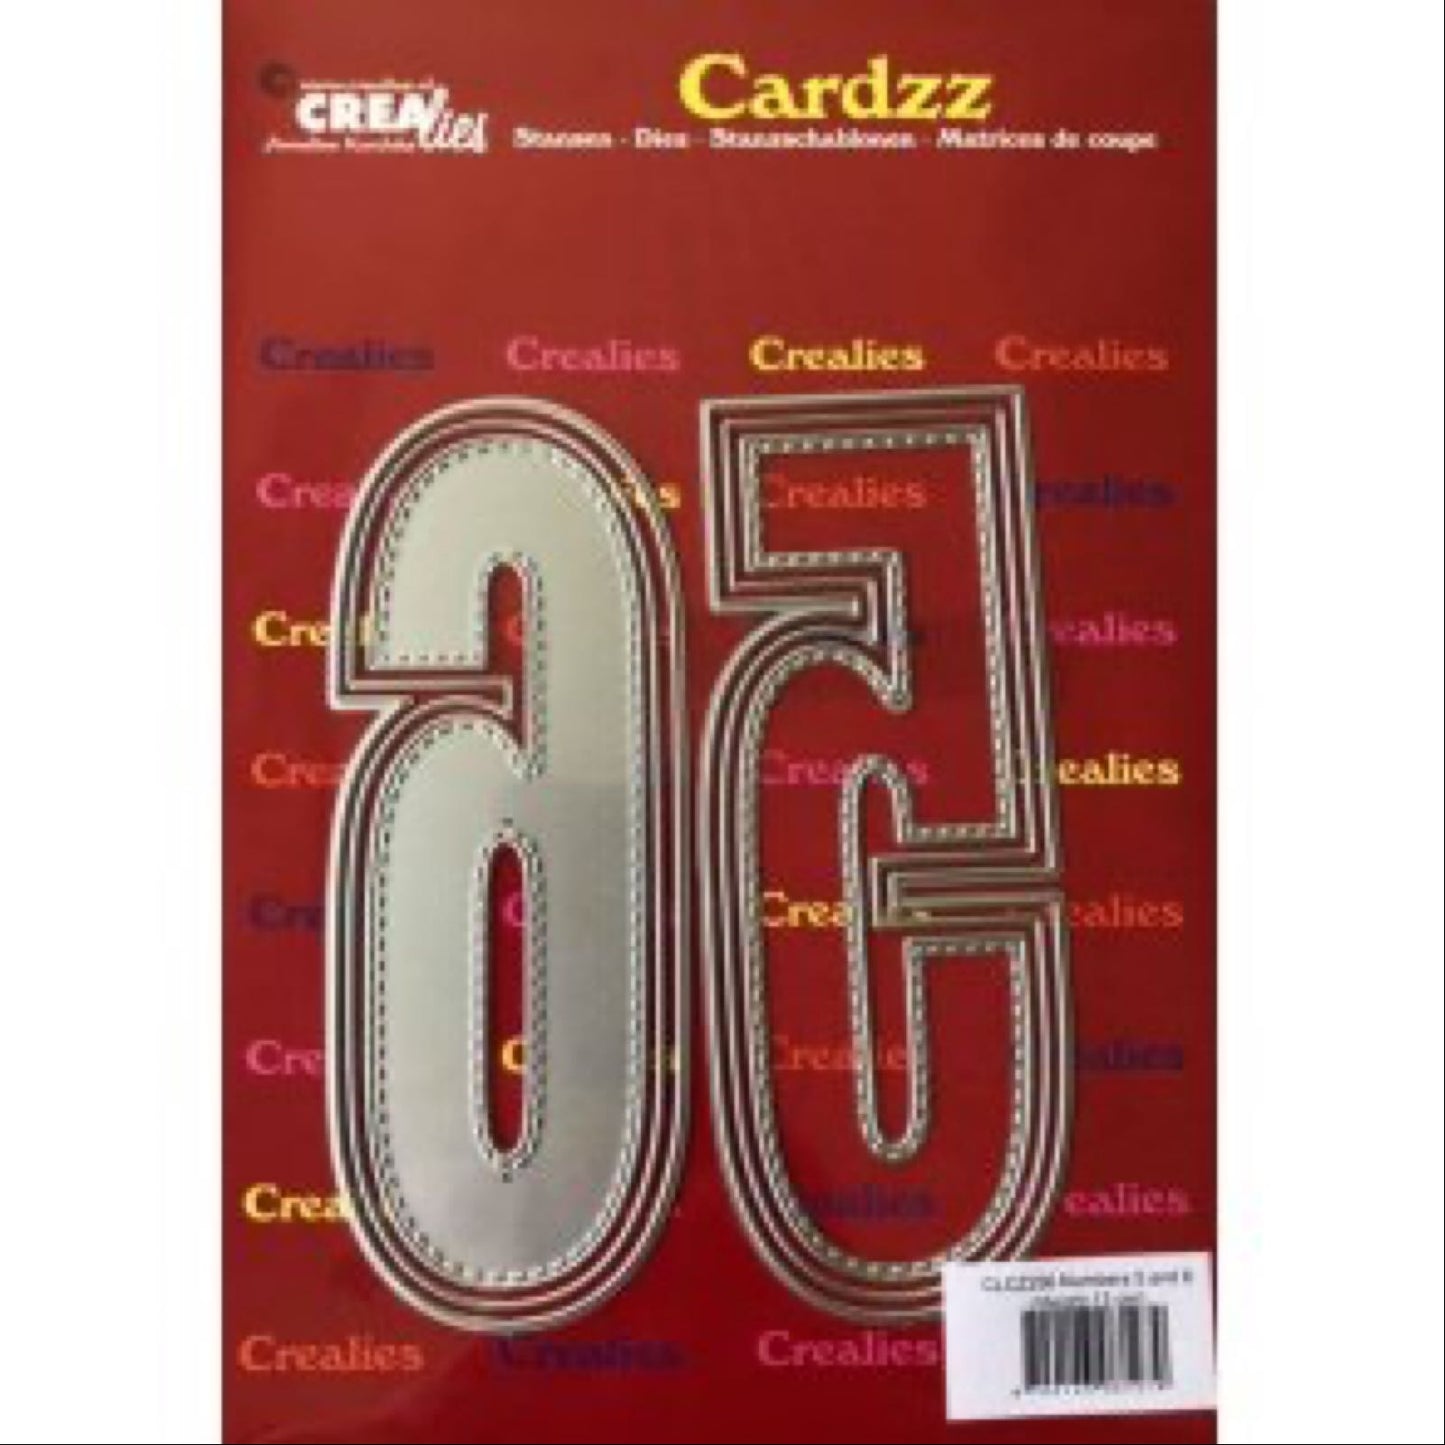 Crealies cardzz numbers 5 and 6/ 9 H:ca13 cm, talldies